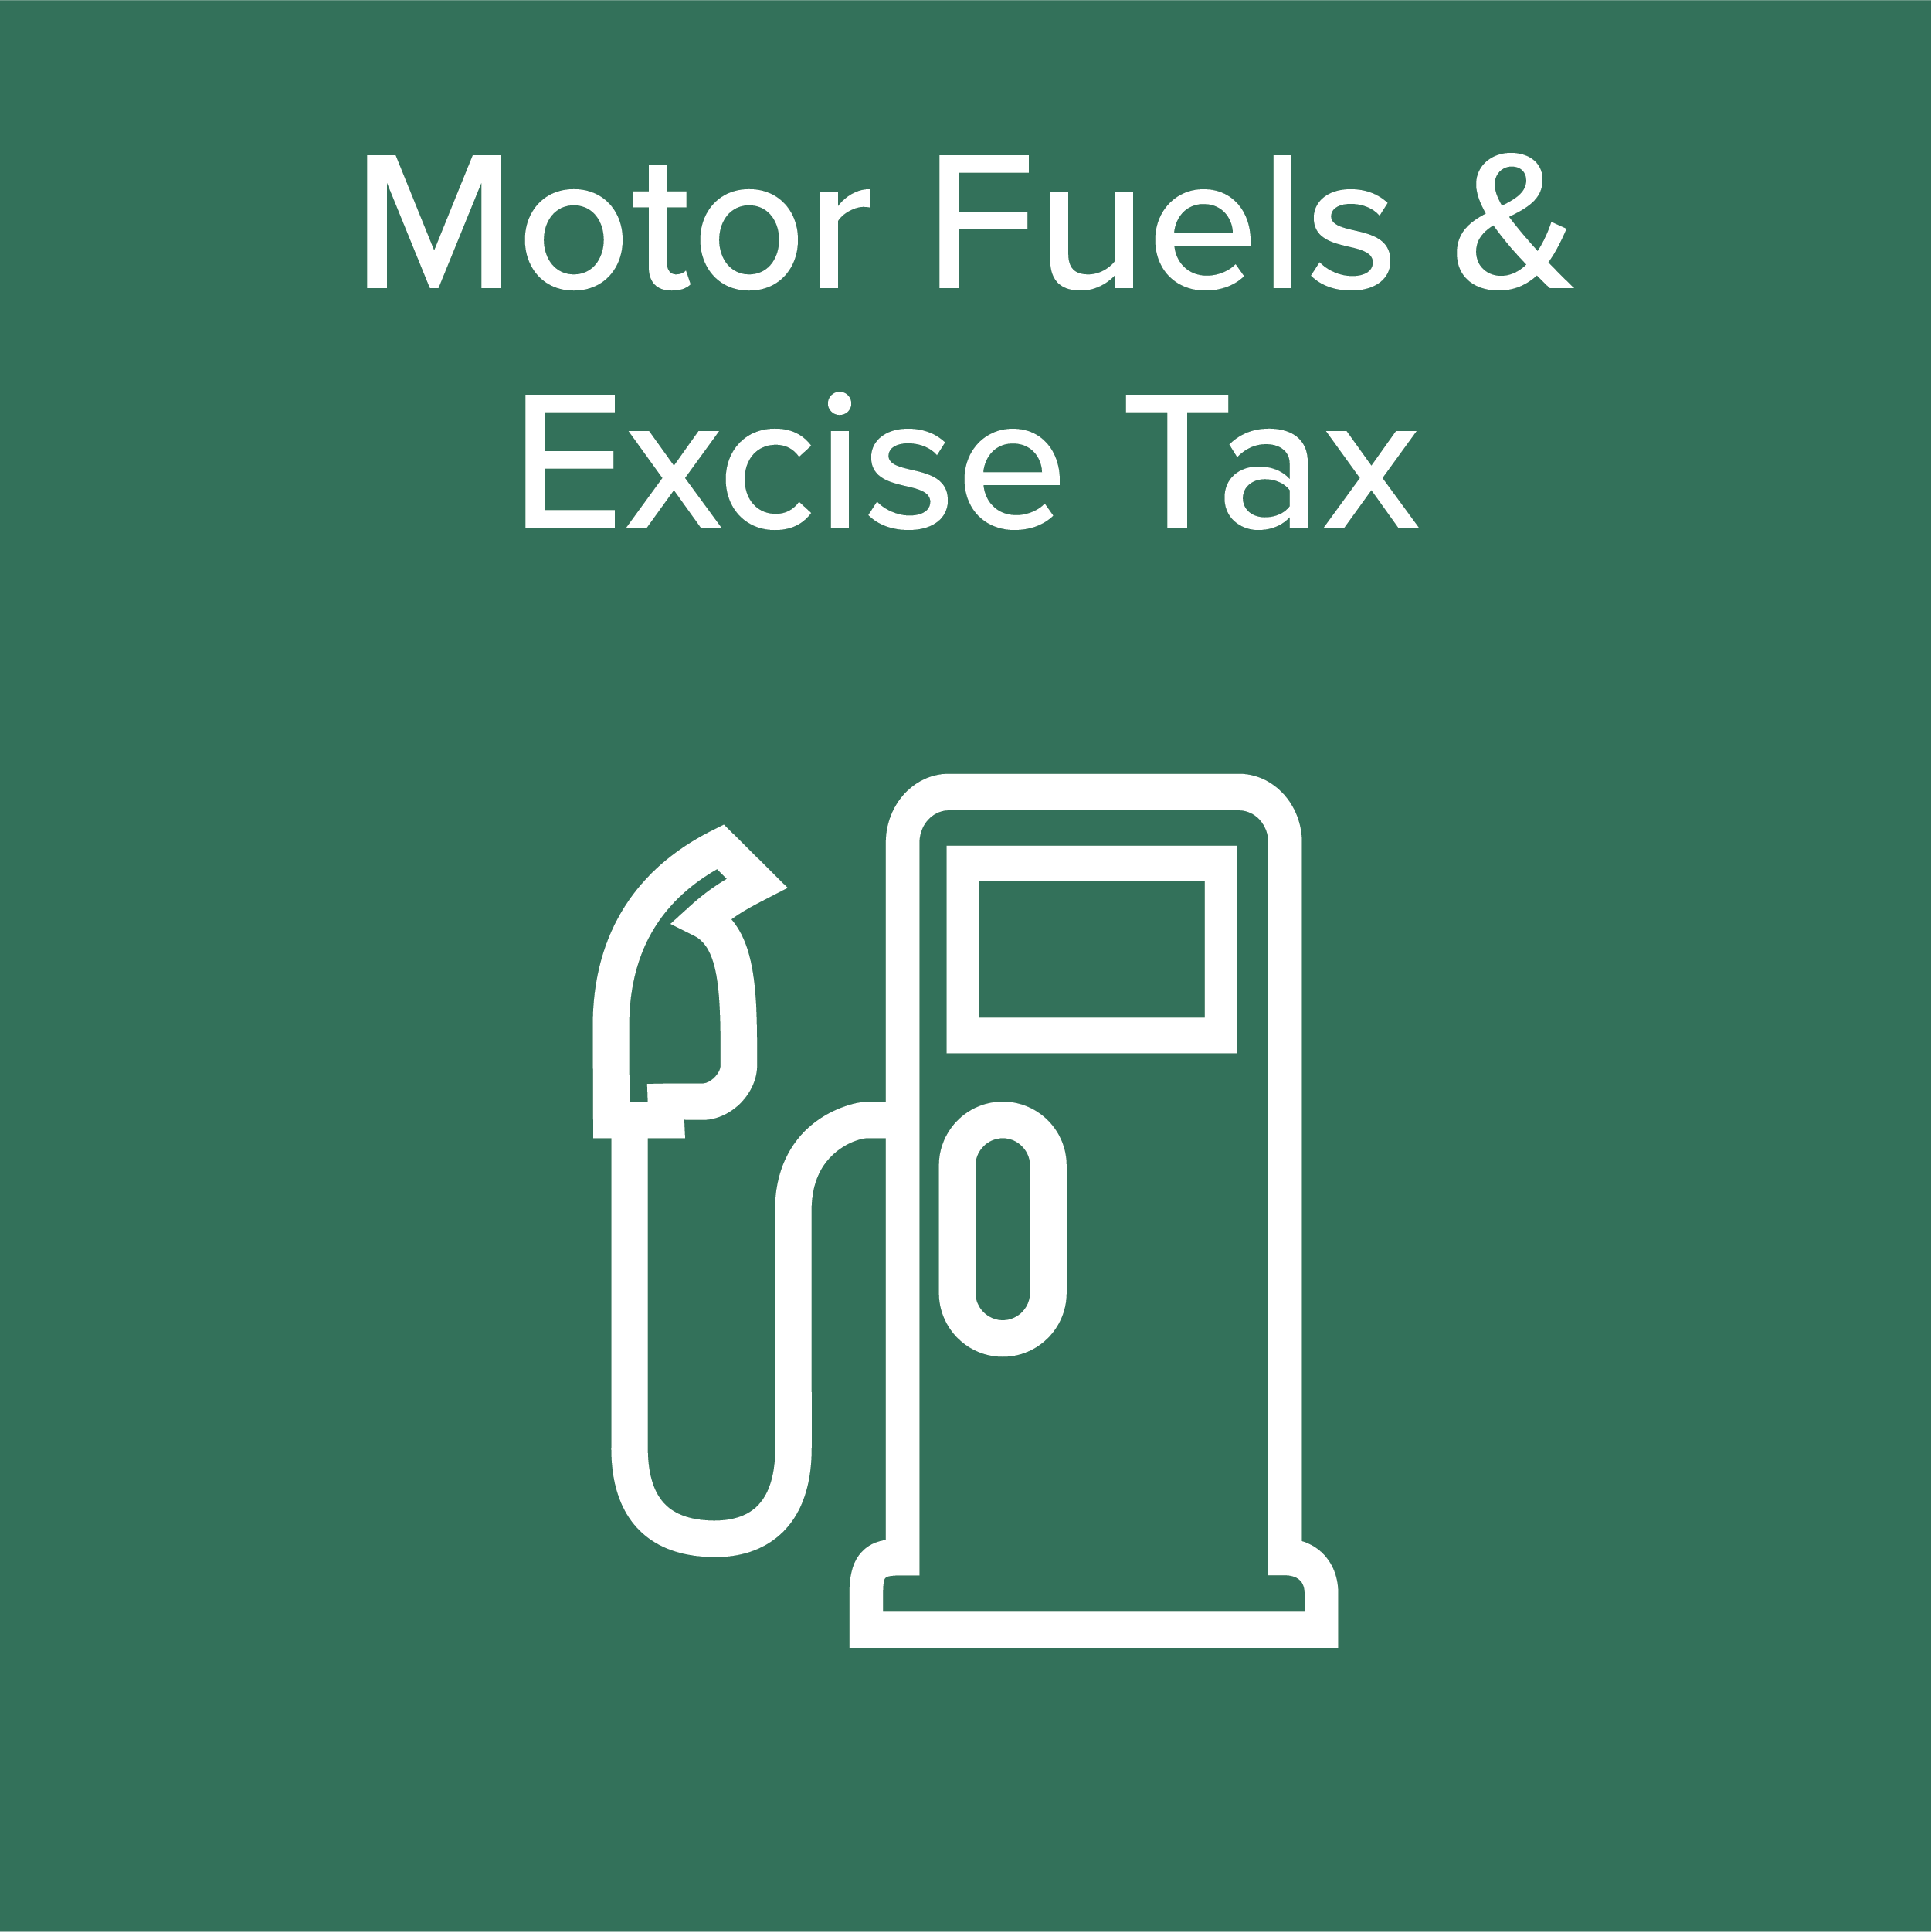 Motor Fuels & Excise Tax